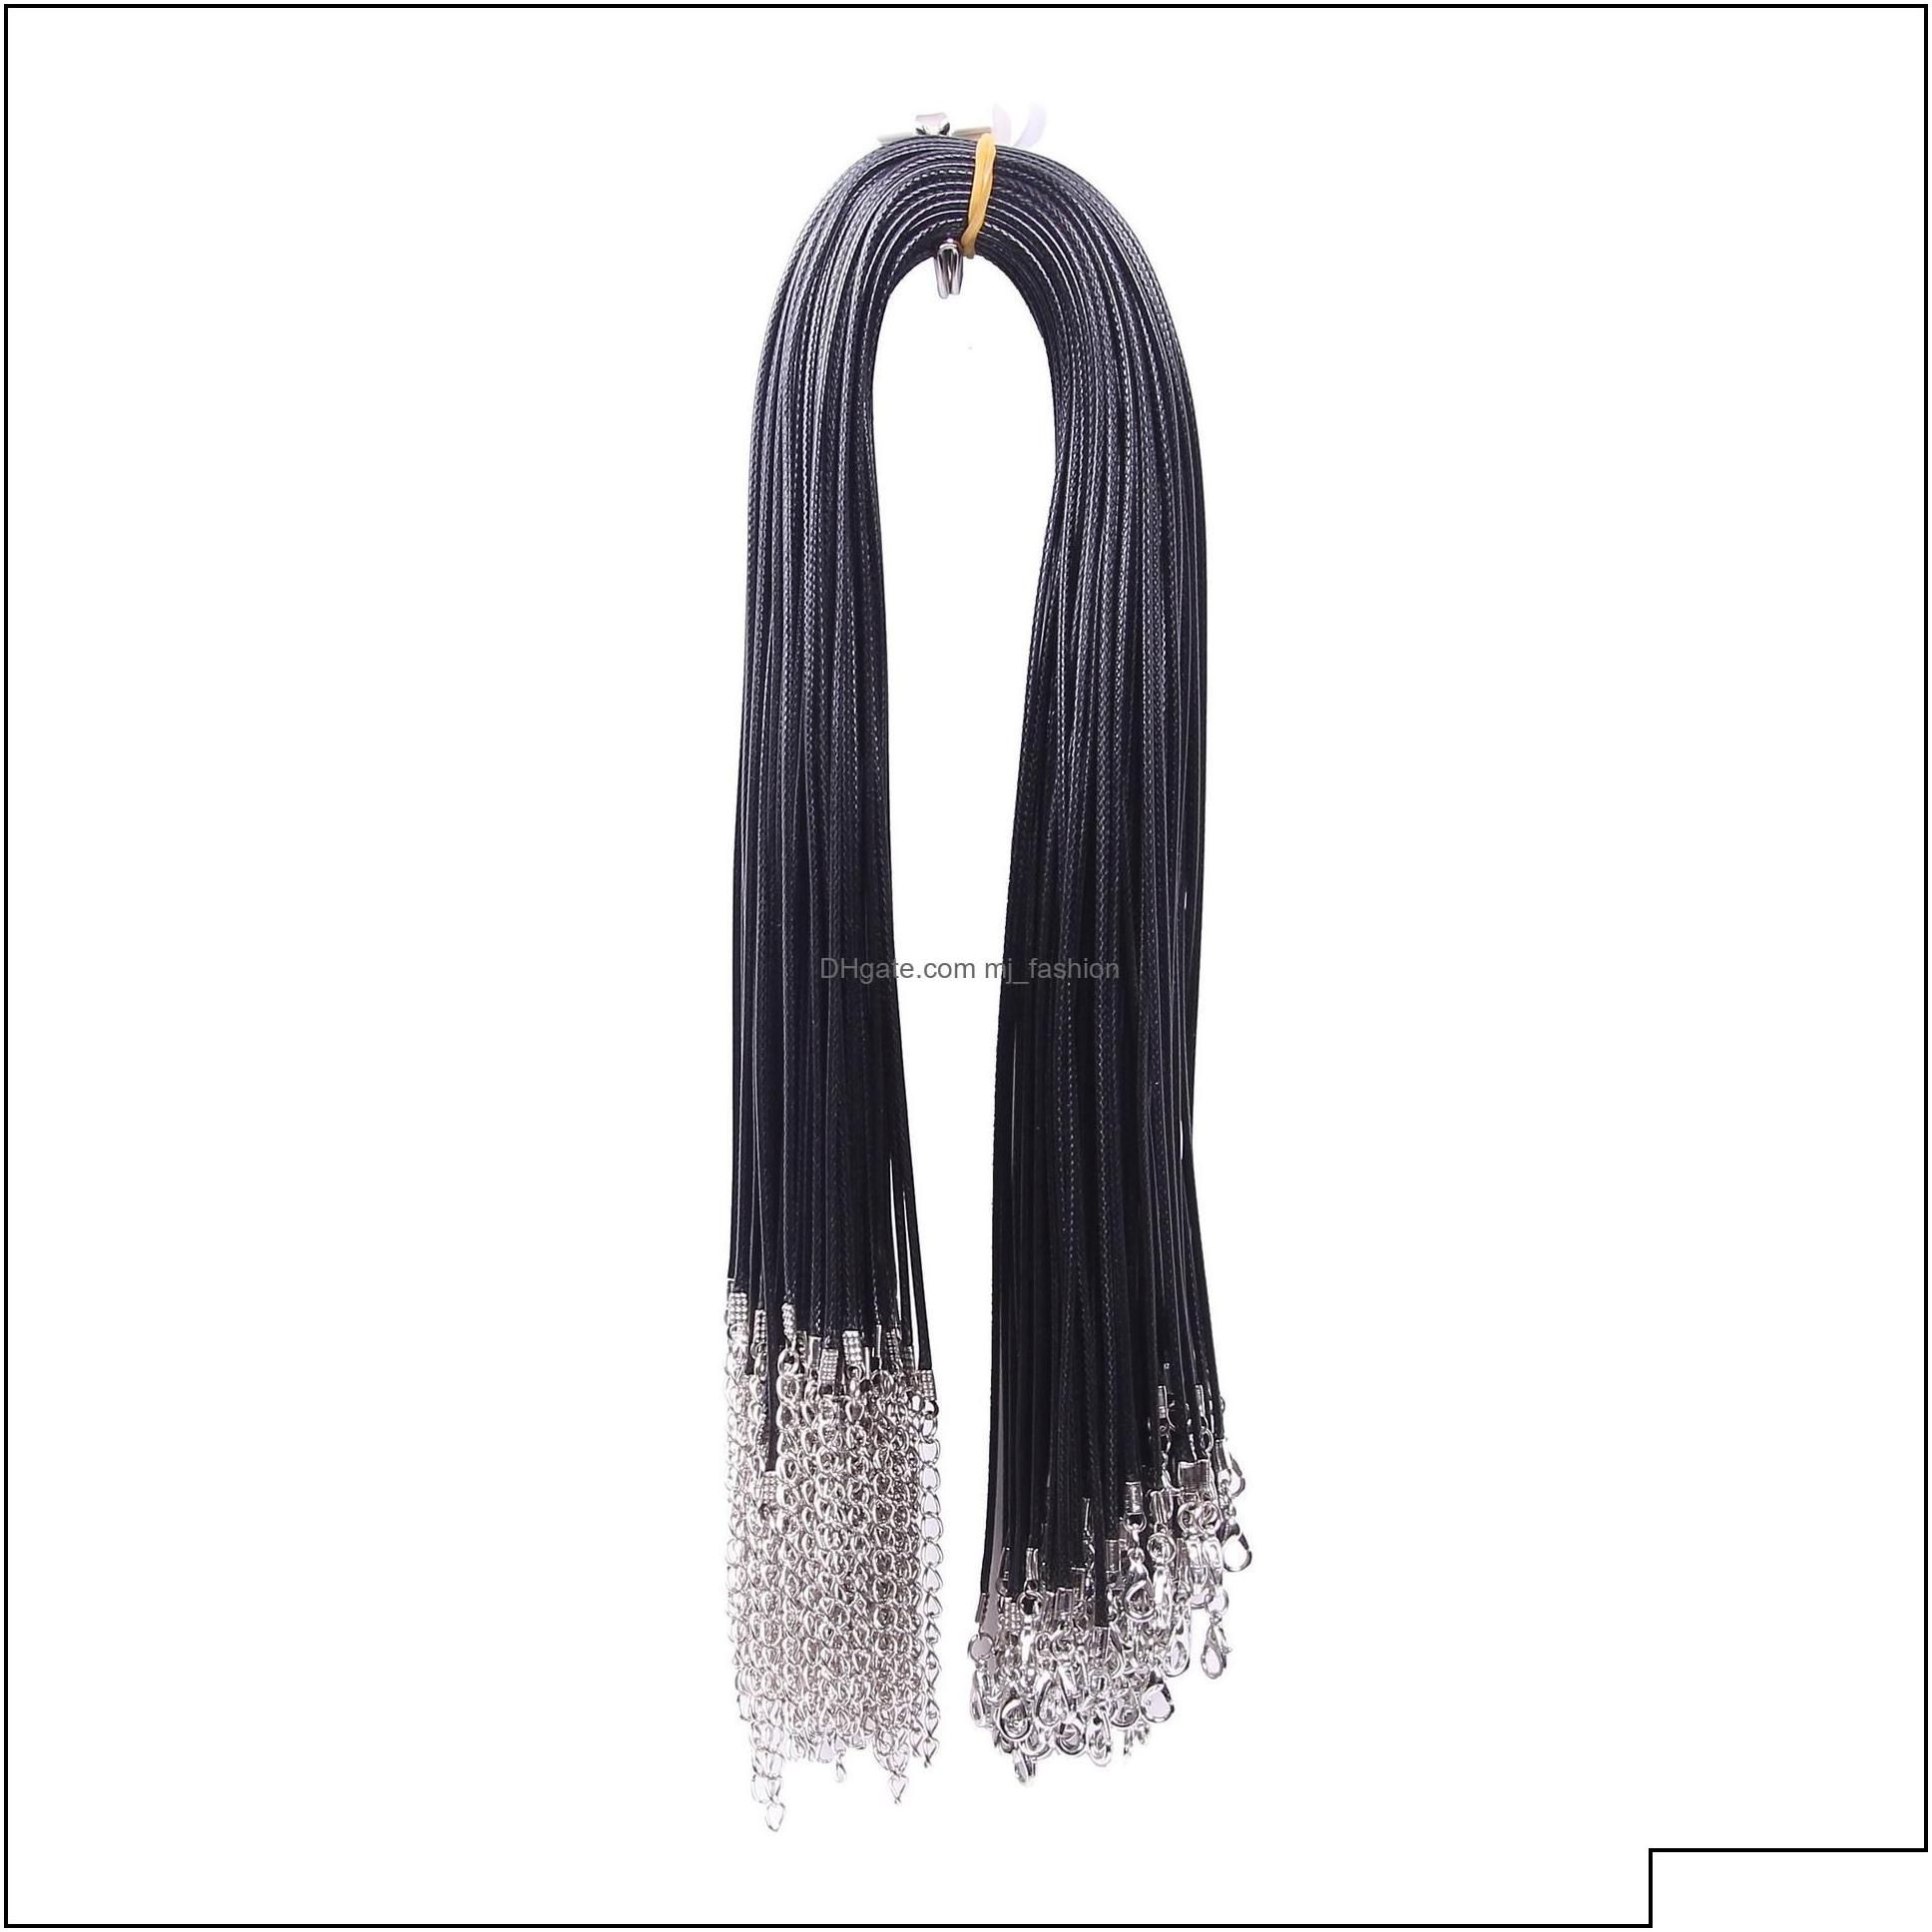 100pcs Black Wax Leather Cord Necklace Rope Chain Clasp String Thread Cable  Jewelry Making Accessories 